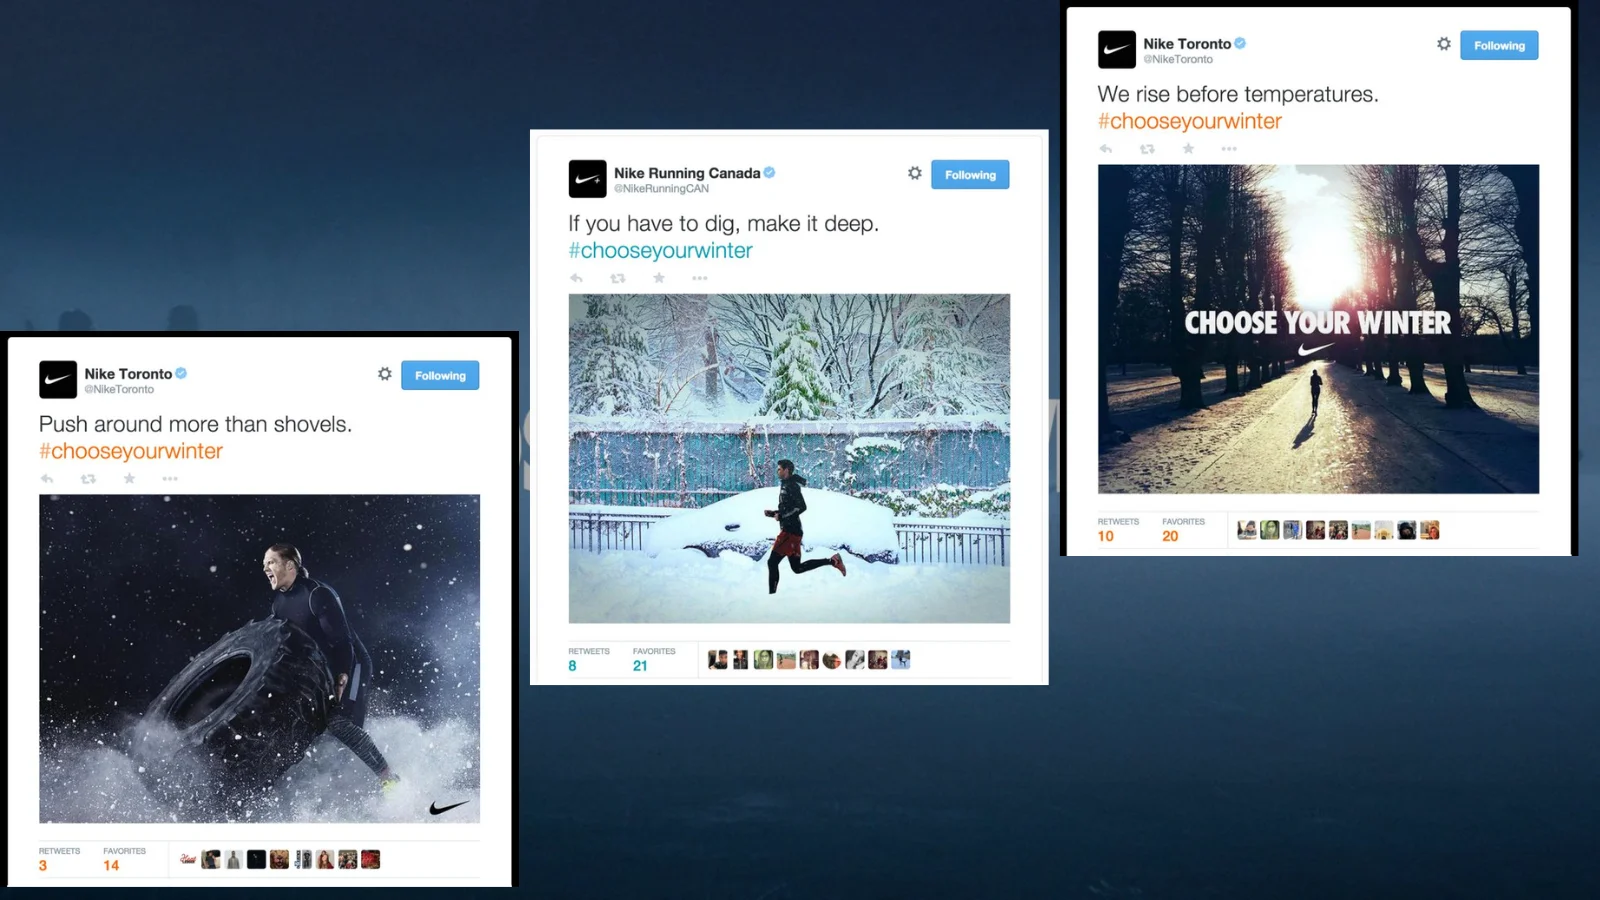 marketing-campaigns-examples-like-nike-choose-your-winter